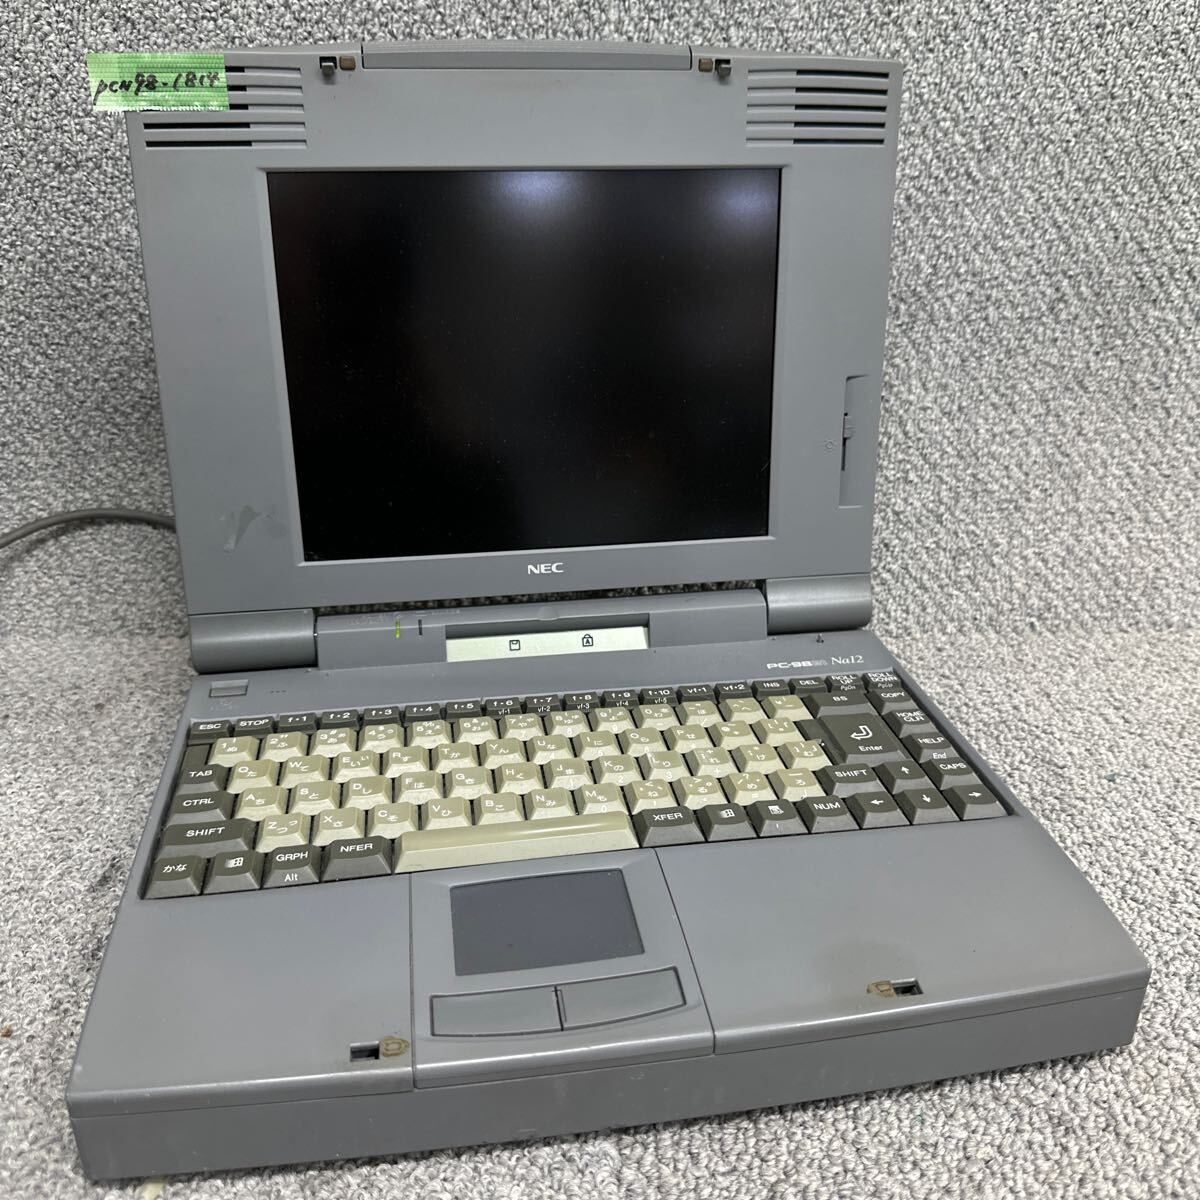 PCN98-1814 super-discount PC98 notebook NEC 98note PC-9821Na12/H10 start-up has confirmed Junk including in a package possibility 